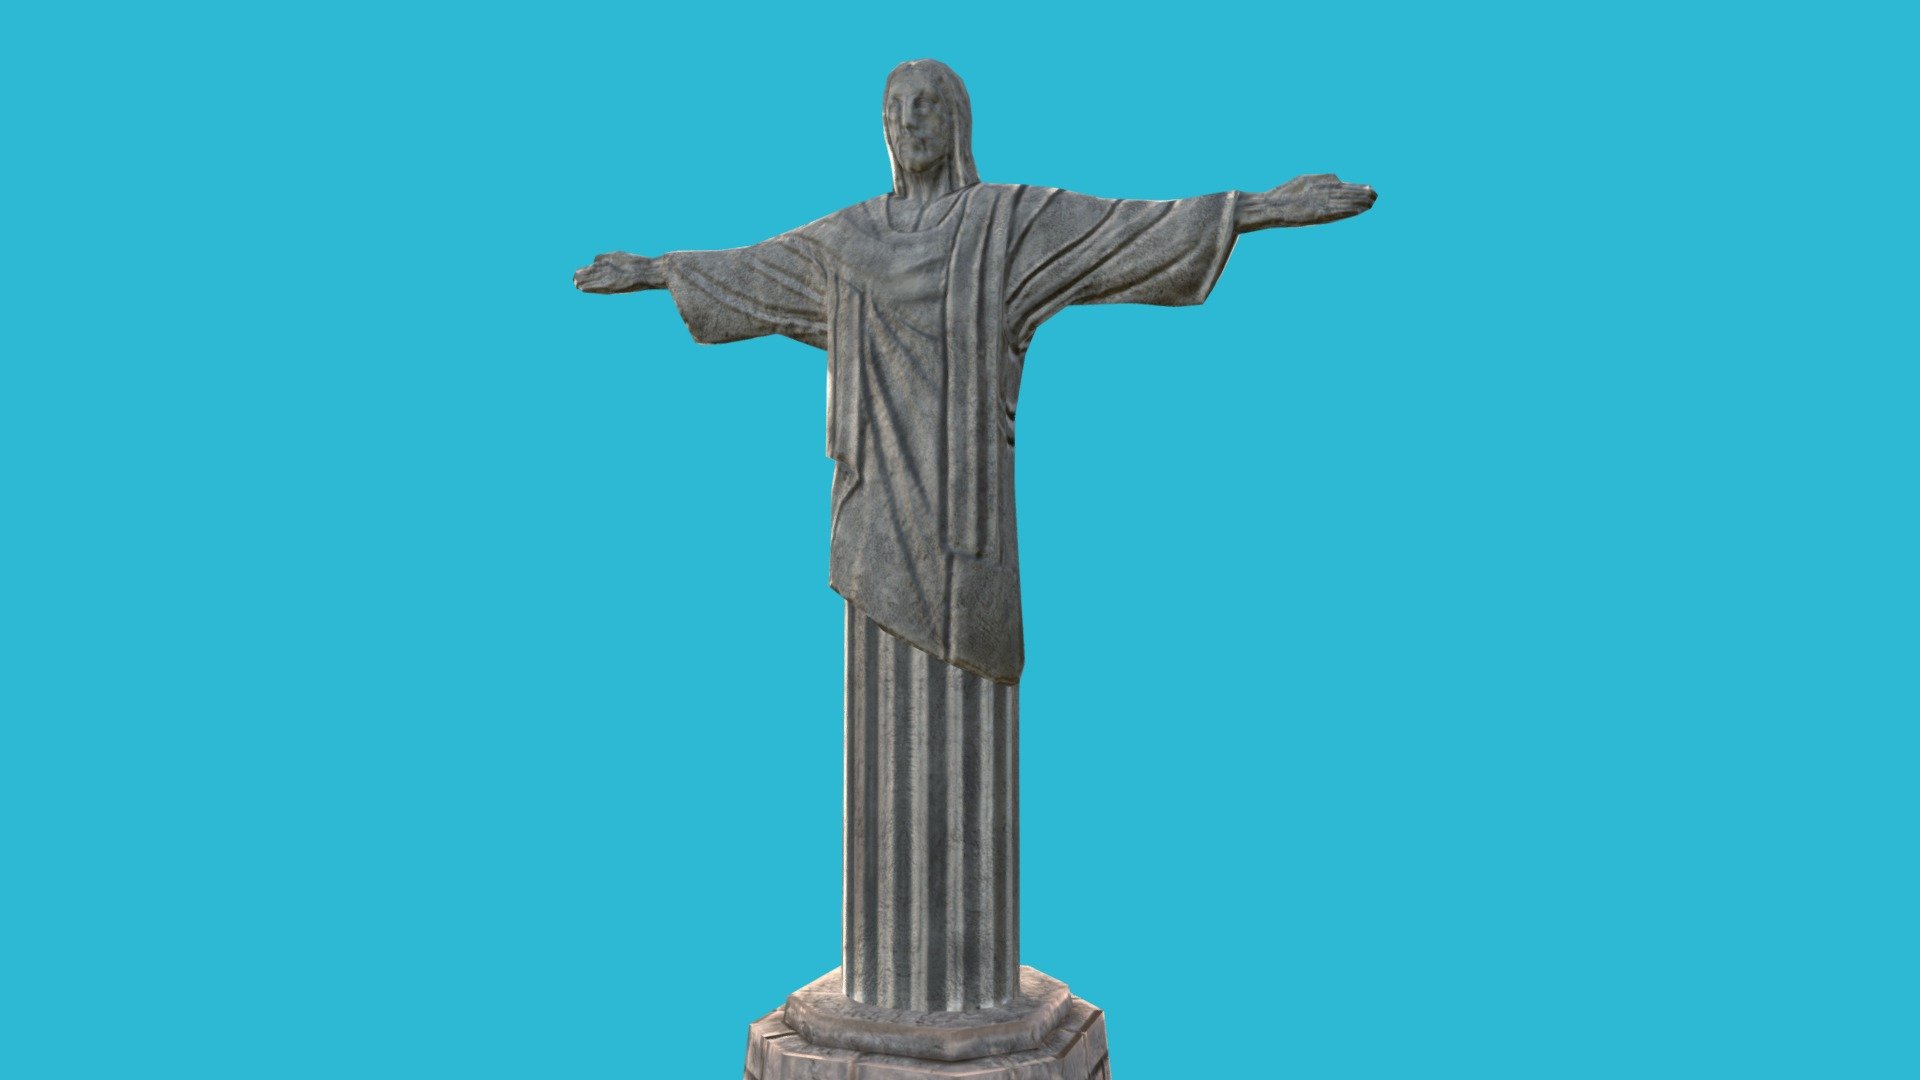 If you’re looking for a top-quality 3D model of Christ The Redeemer that’s optimized for game/realtime/background use, then this is the one for you! This model has been carefully crafted to strike the perfect balance between visual quality and performance, ensuring that it runs smoothly and seamlessly in almost any game engine. But that’s not all - this model also boasts an impressive level of detail, making it an excellent choice for use in rendering complex 3D scenes. So if you want a versatile, high-quality 3D model that will elevate your project to the next level, look no further than this one!

Technical Details:

Number of textures: 2
Polygon count: 1144
Vertices count: 587
Number of meshes/prefabs: 1
Centered at origin (0,0,0): Yes
UV mapping: Yes, non-overlapping
Types of materials and texture maps: Color texture 2048x2048, Bump texture 512x512 - Christ The Redeemer Rio Statue LowPoly - Buy Royalty Free 3D model by Xylla 3d model